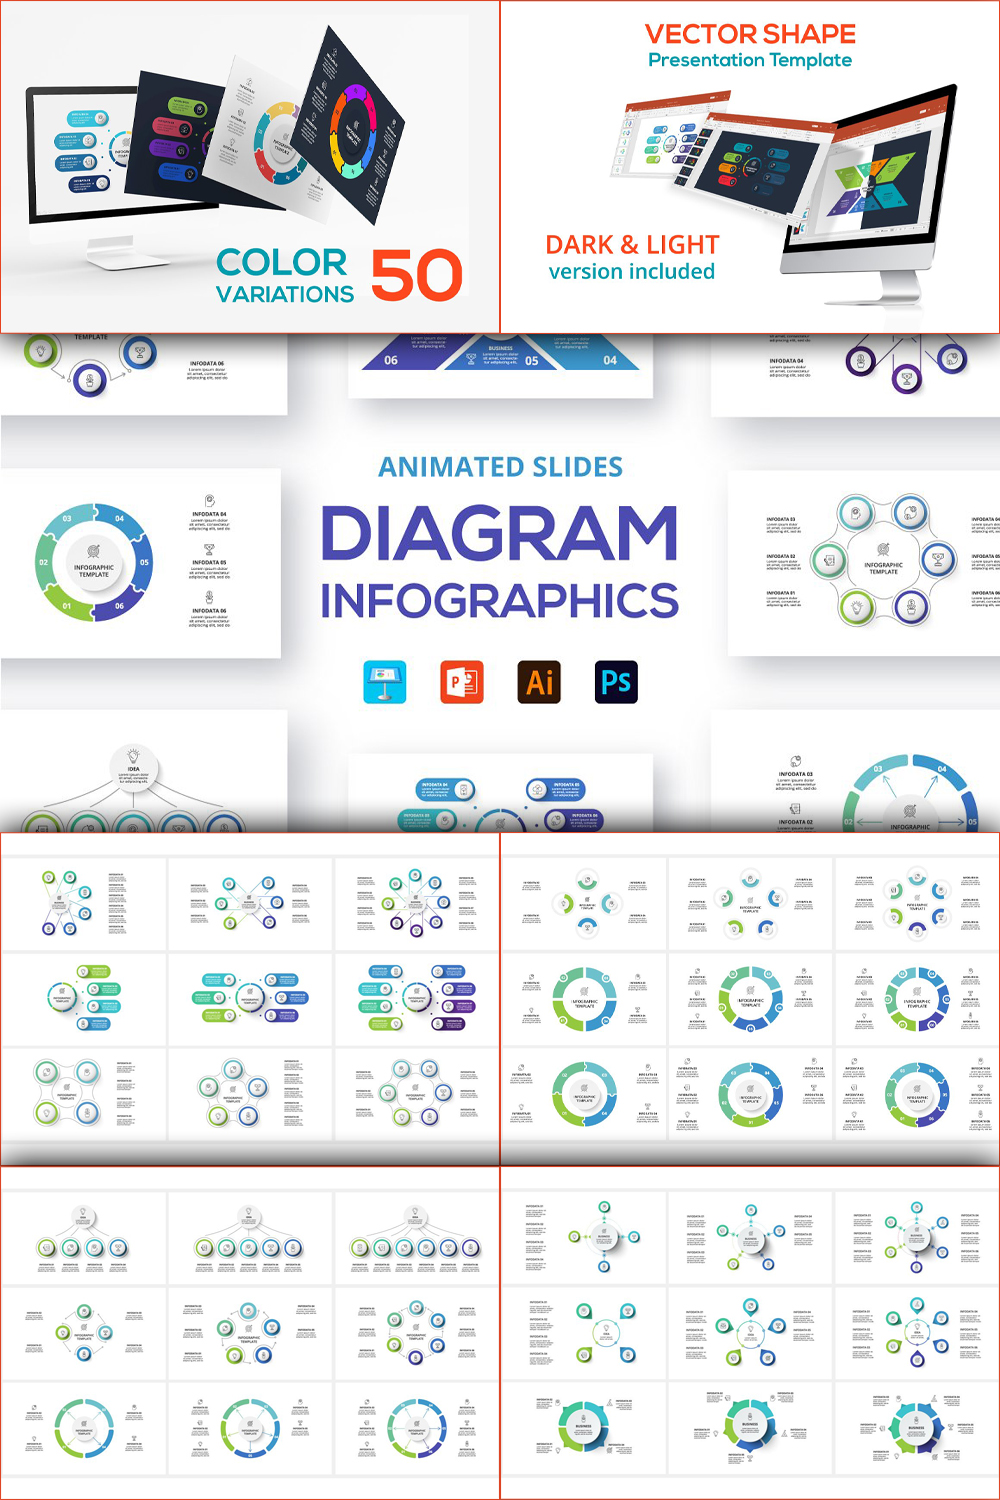 Diagrams animated infographics of pinterest.